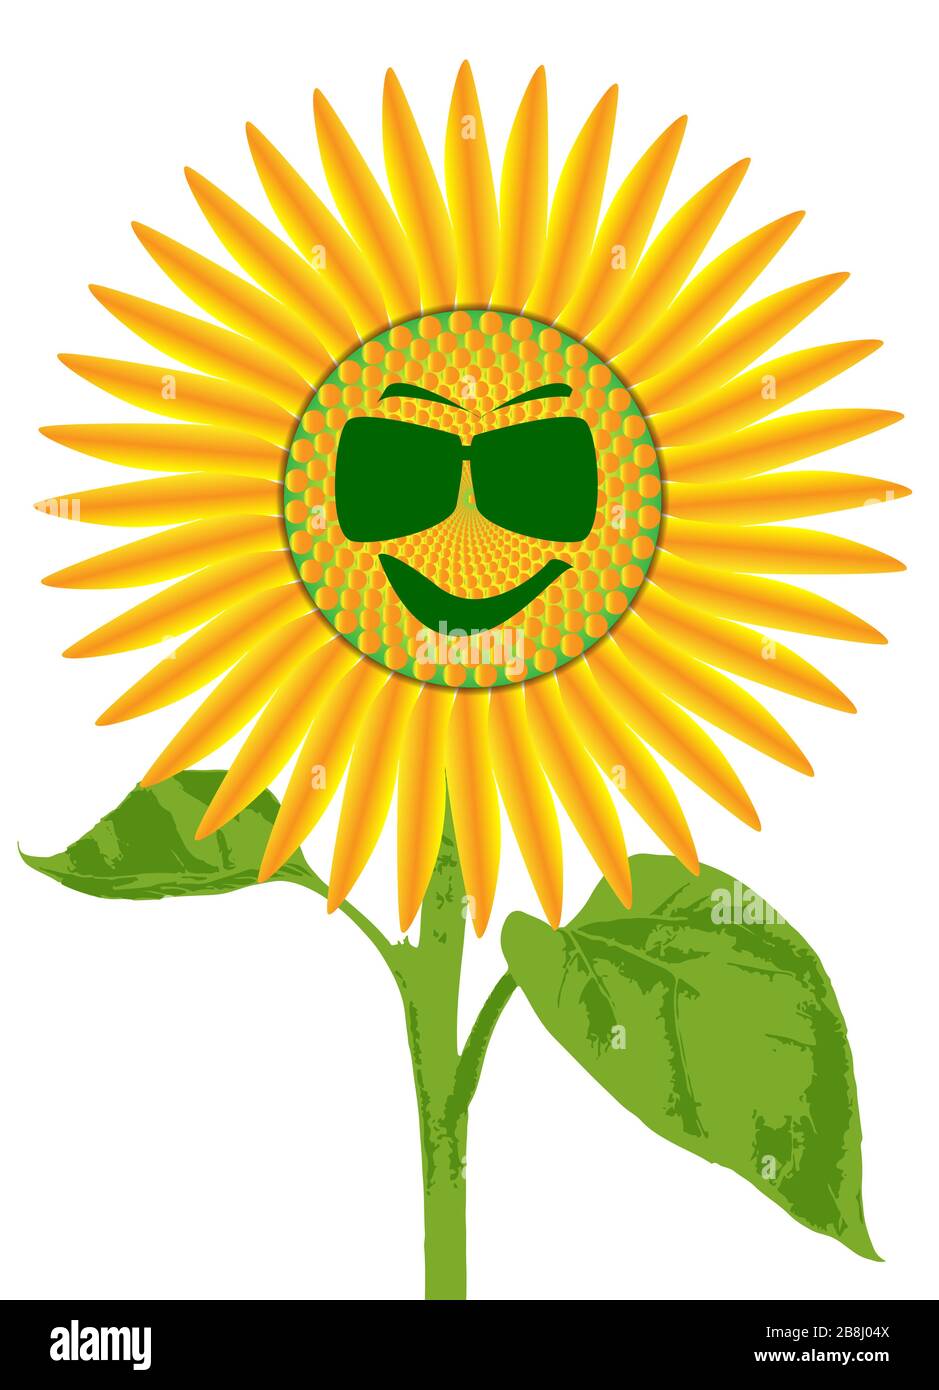 The head of a large sunflower plant isolated on a white background with a smiley face with sun glasses Stock Vector